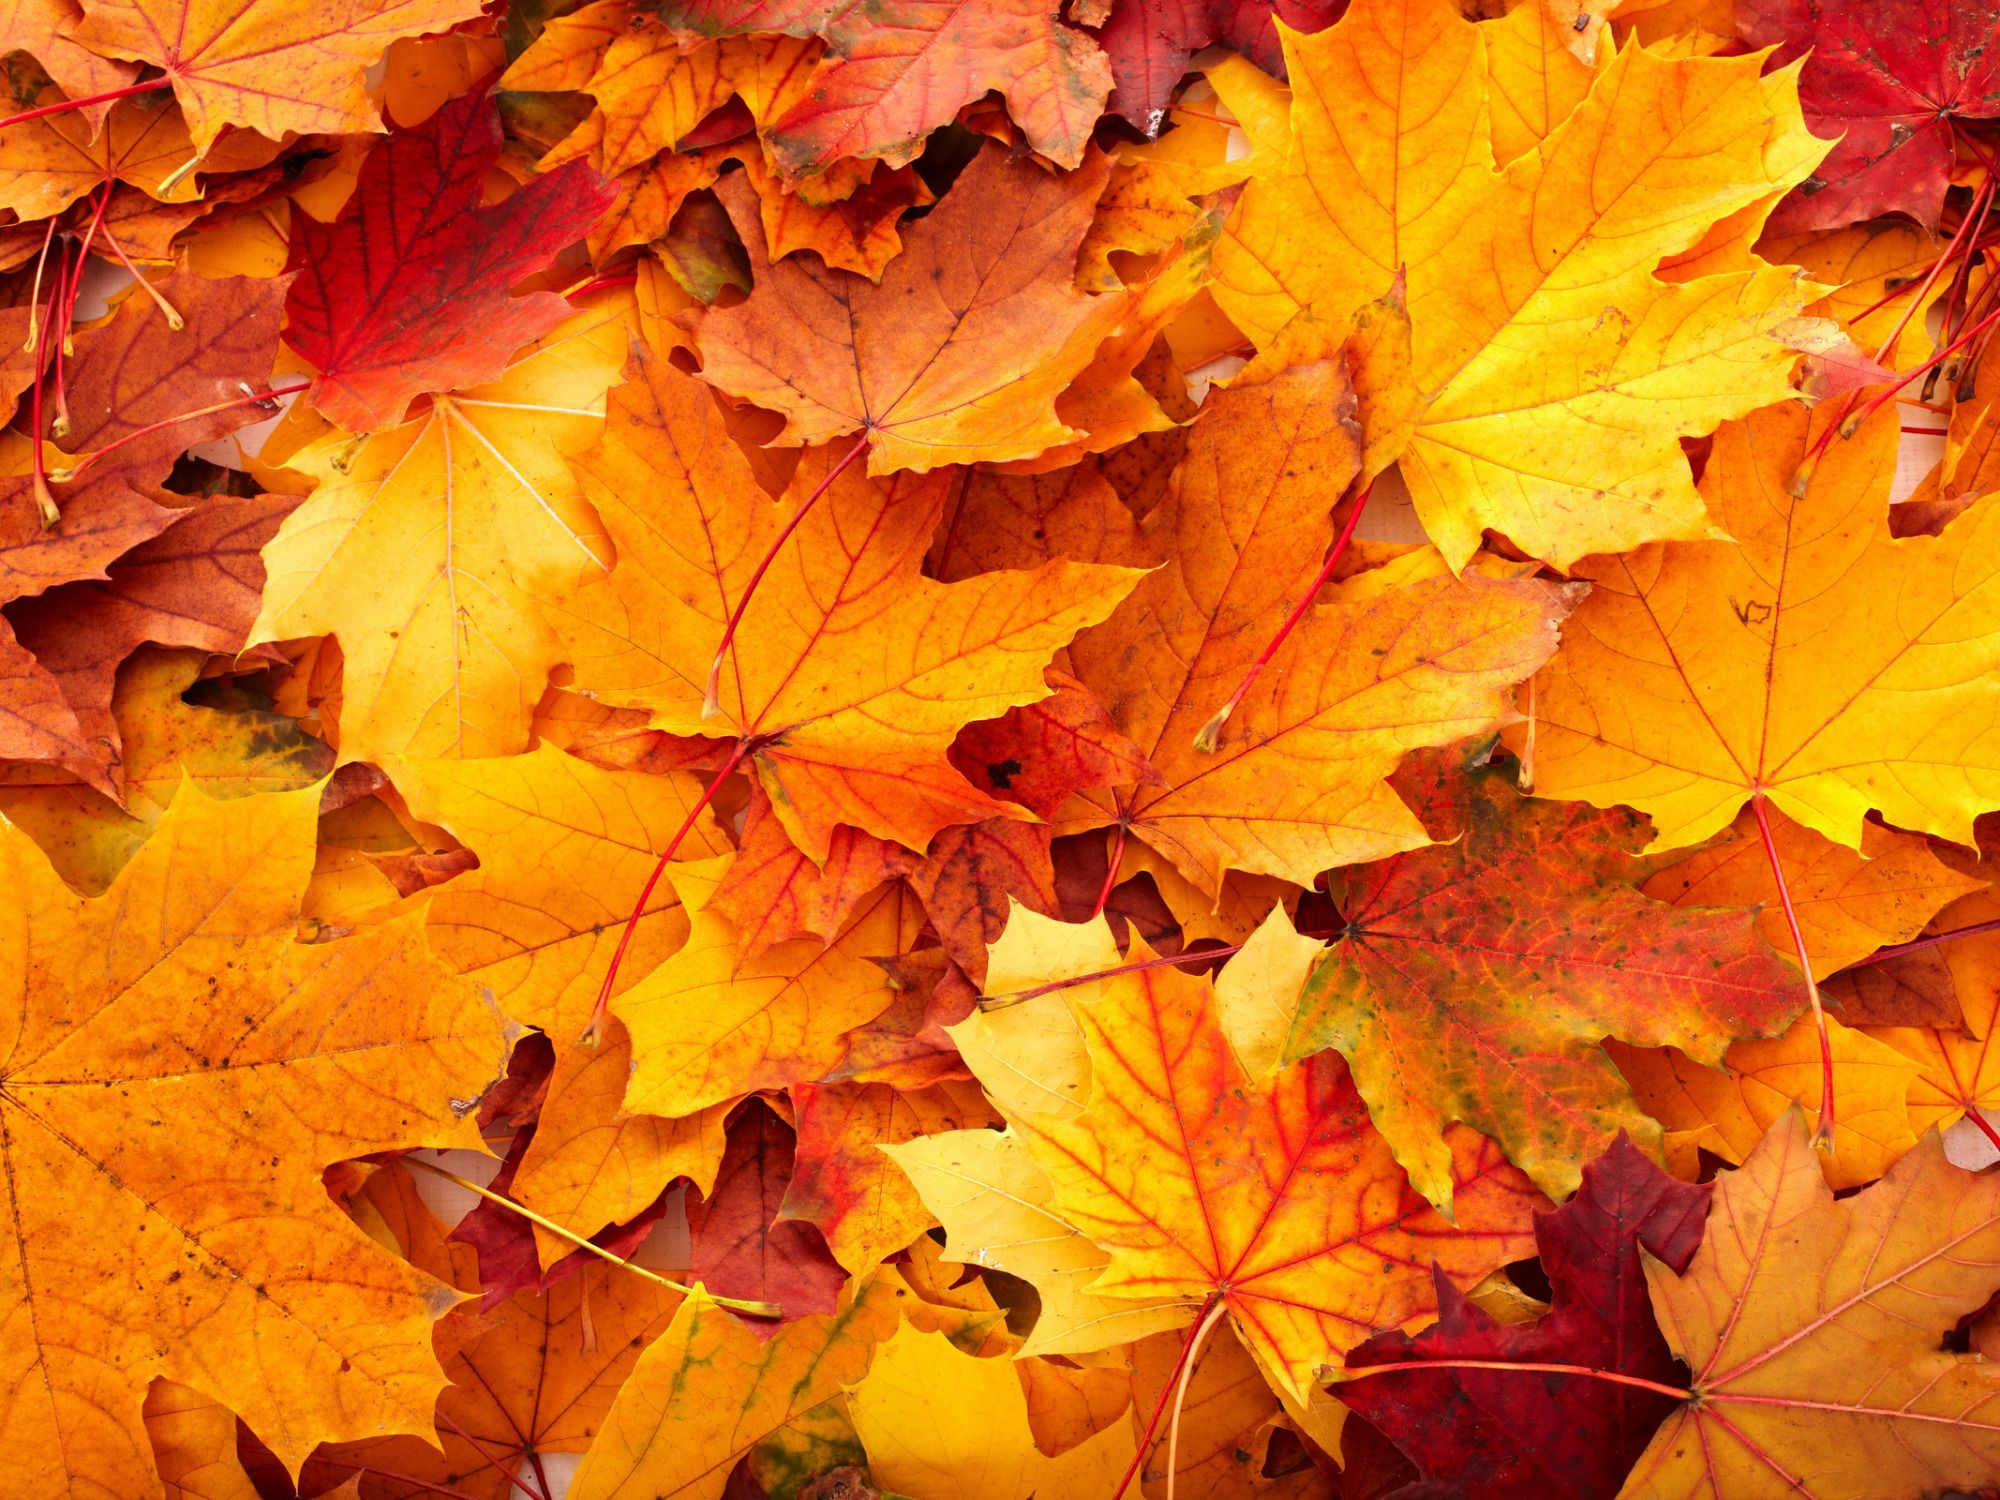 Autumn Leaves Wallpaper With Yellow Color Leaves Beautiful Autumn